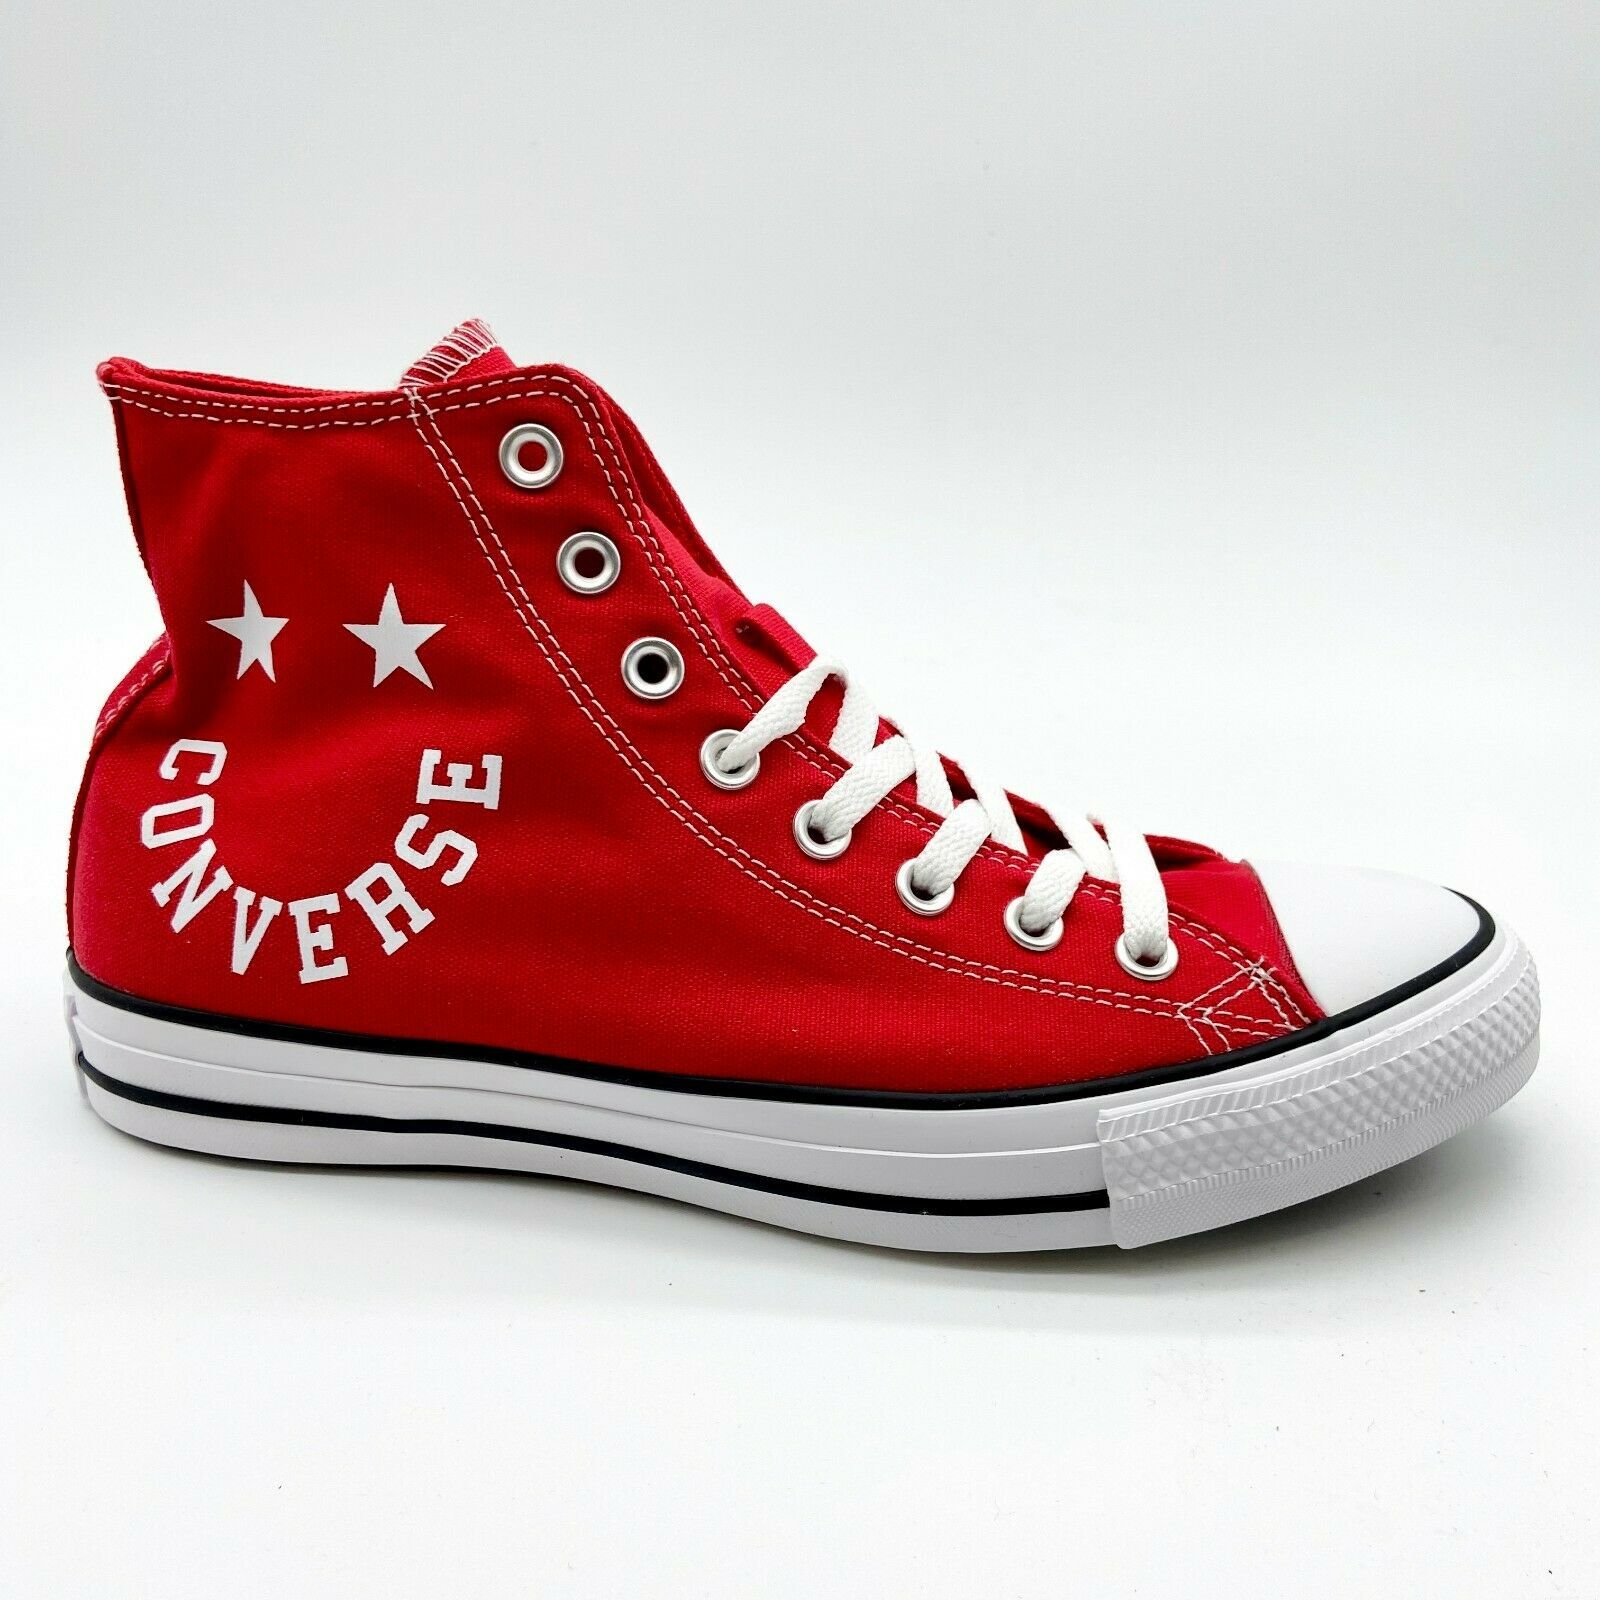 Converse Chuck Taylor All Star Hi Smiley University Red Womens Sneakers 167069F